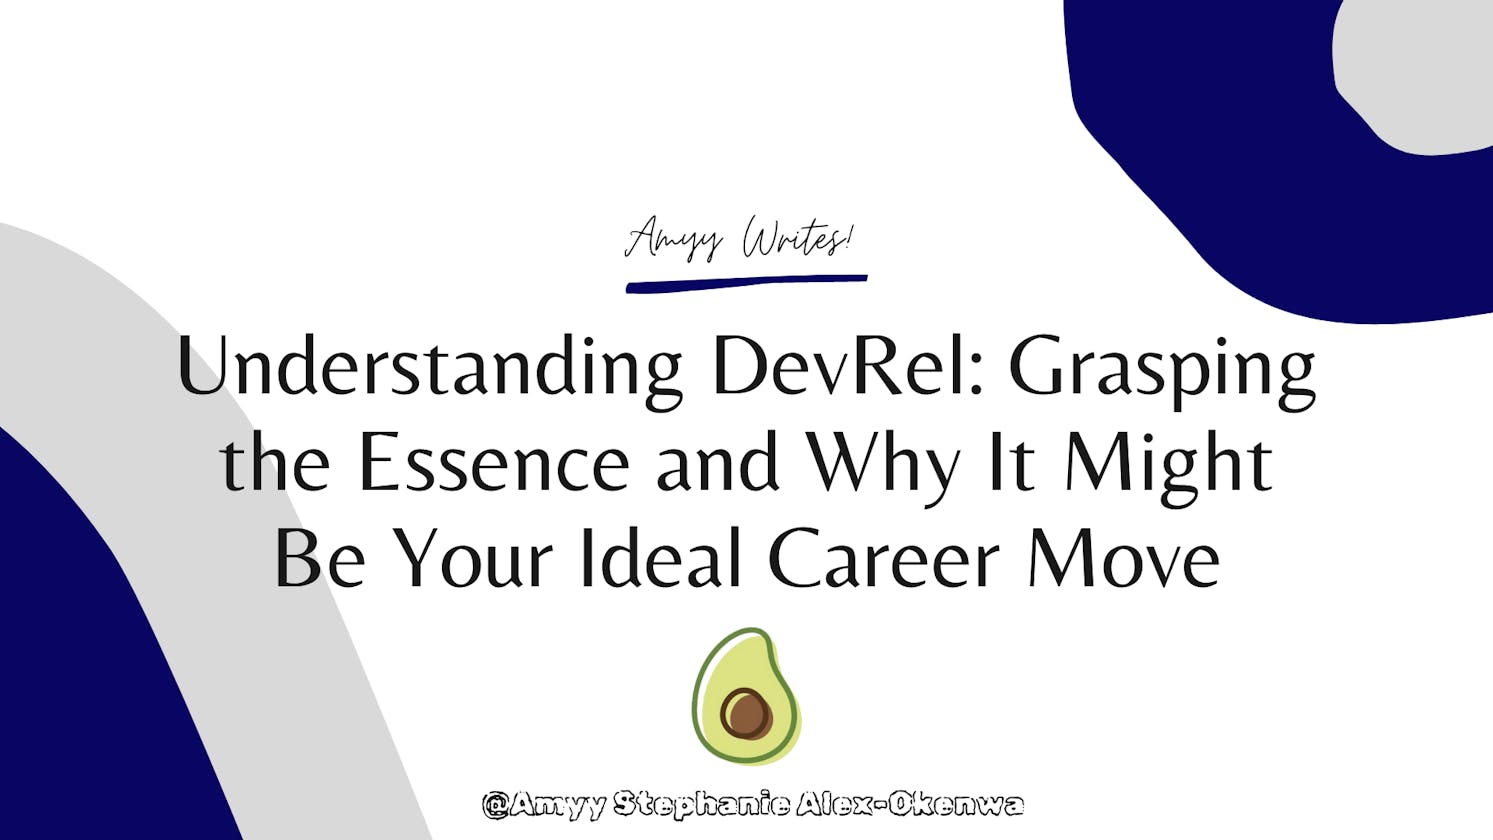 Understanding DevRel: Grasping the Essence and Why It Might Be Your Ideal Career Move